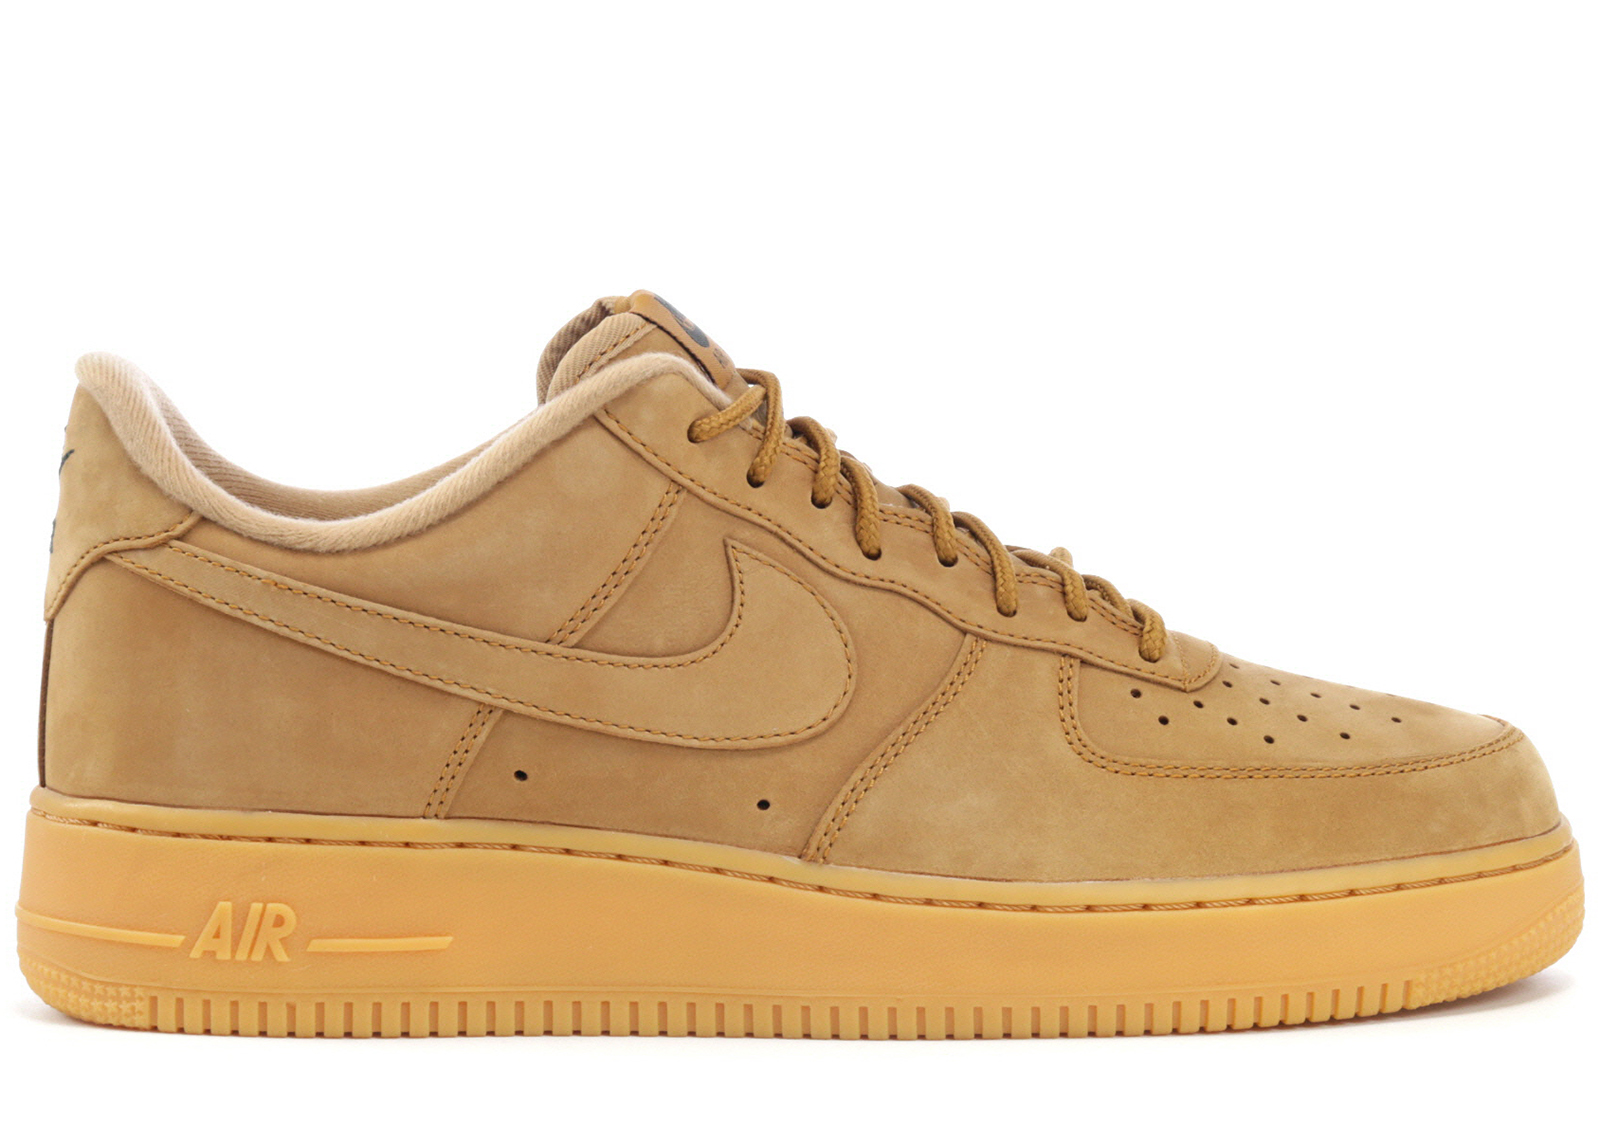 Nike Air Force 1 Low Flax (2017 